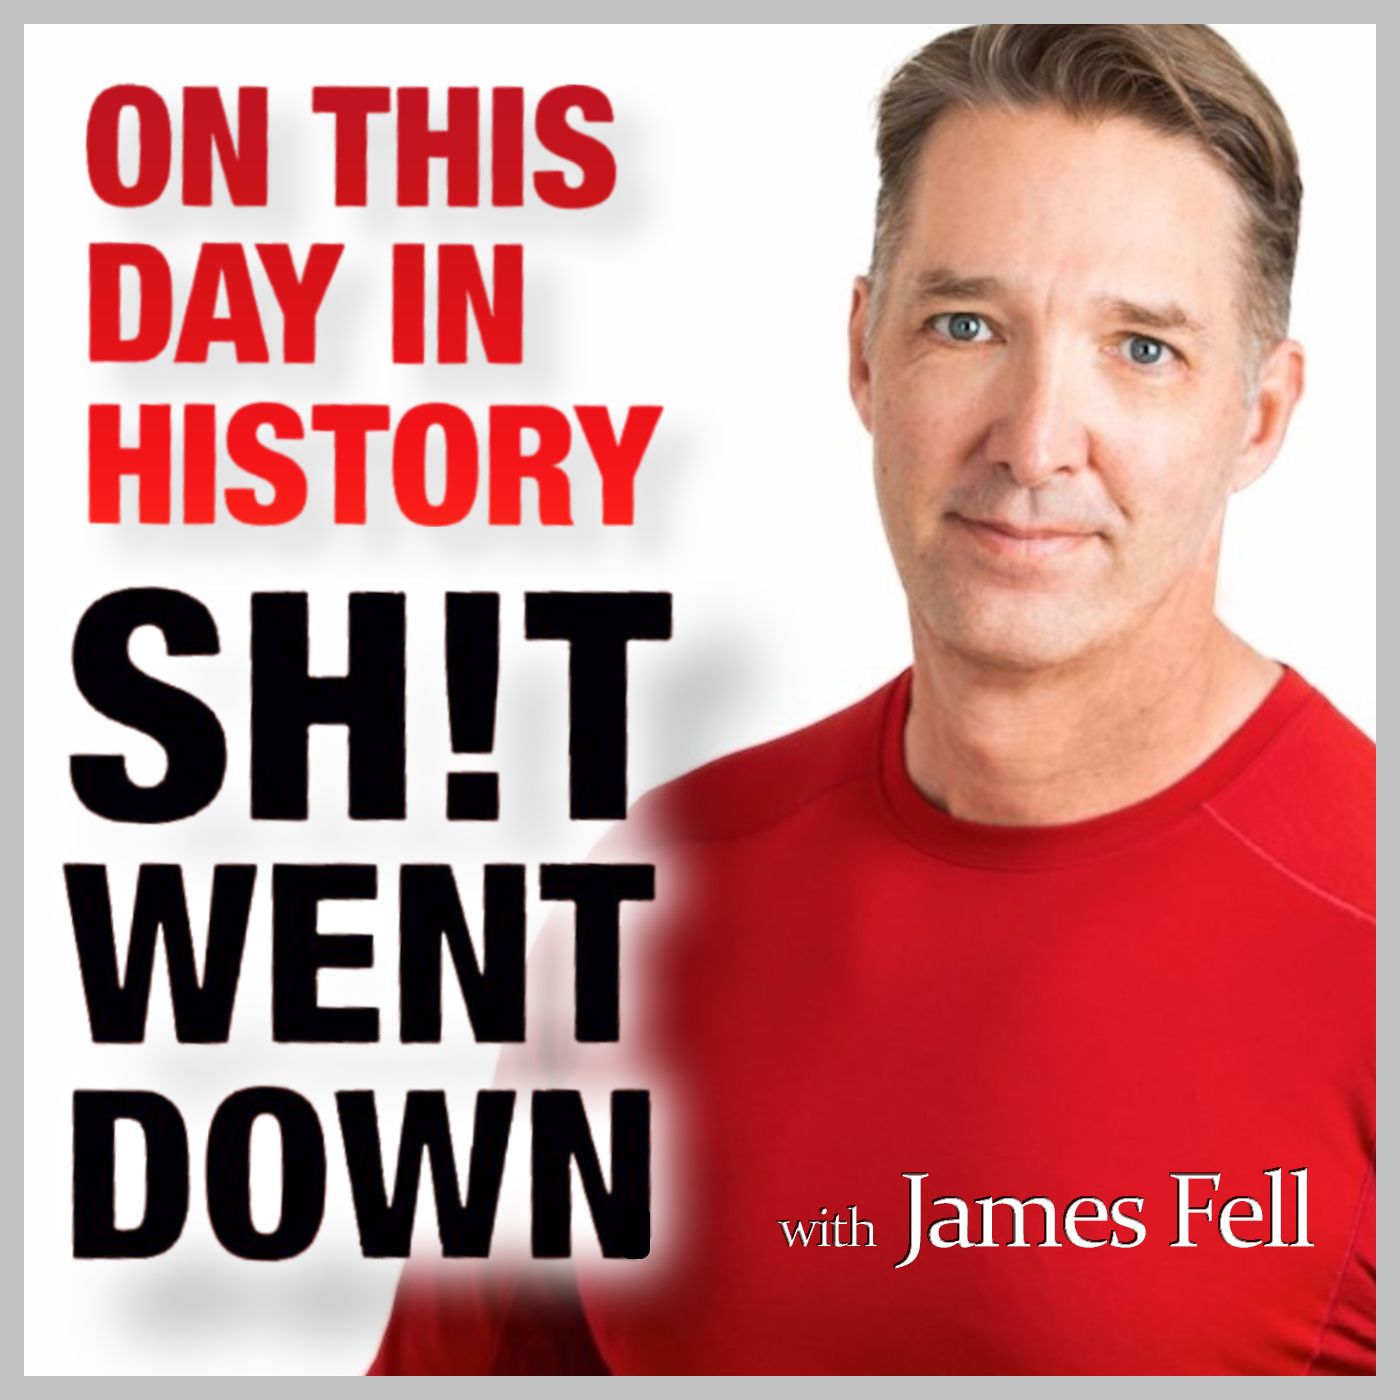 On This Day in History, Sh!t Went Down: with ”Sweary Historian” James Fell